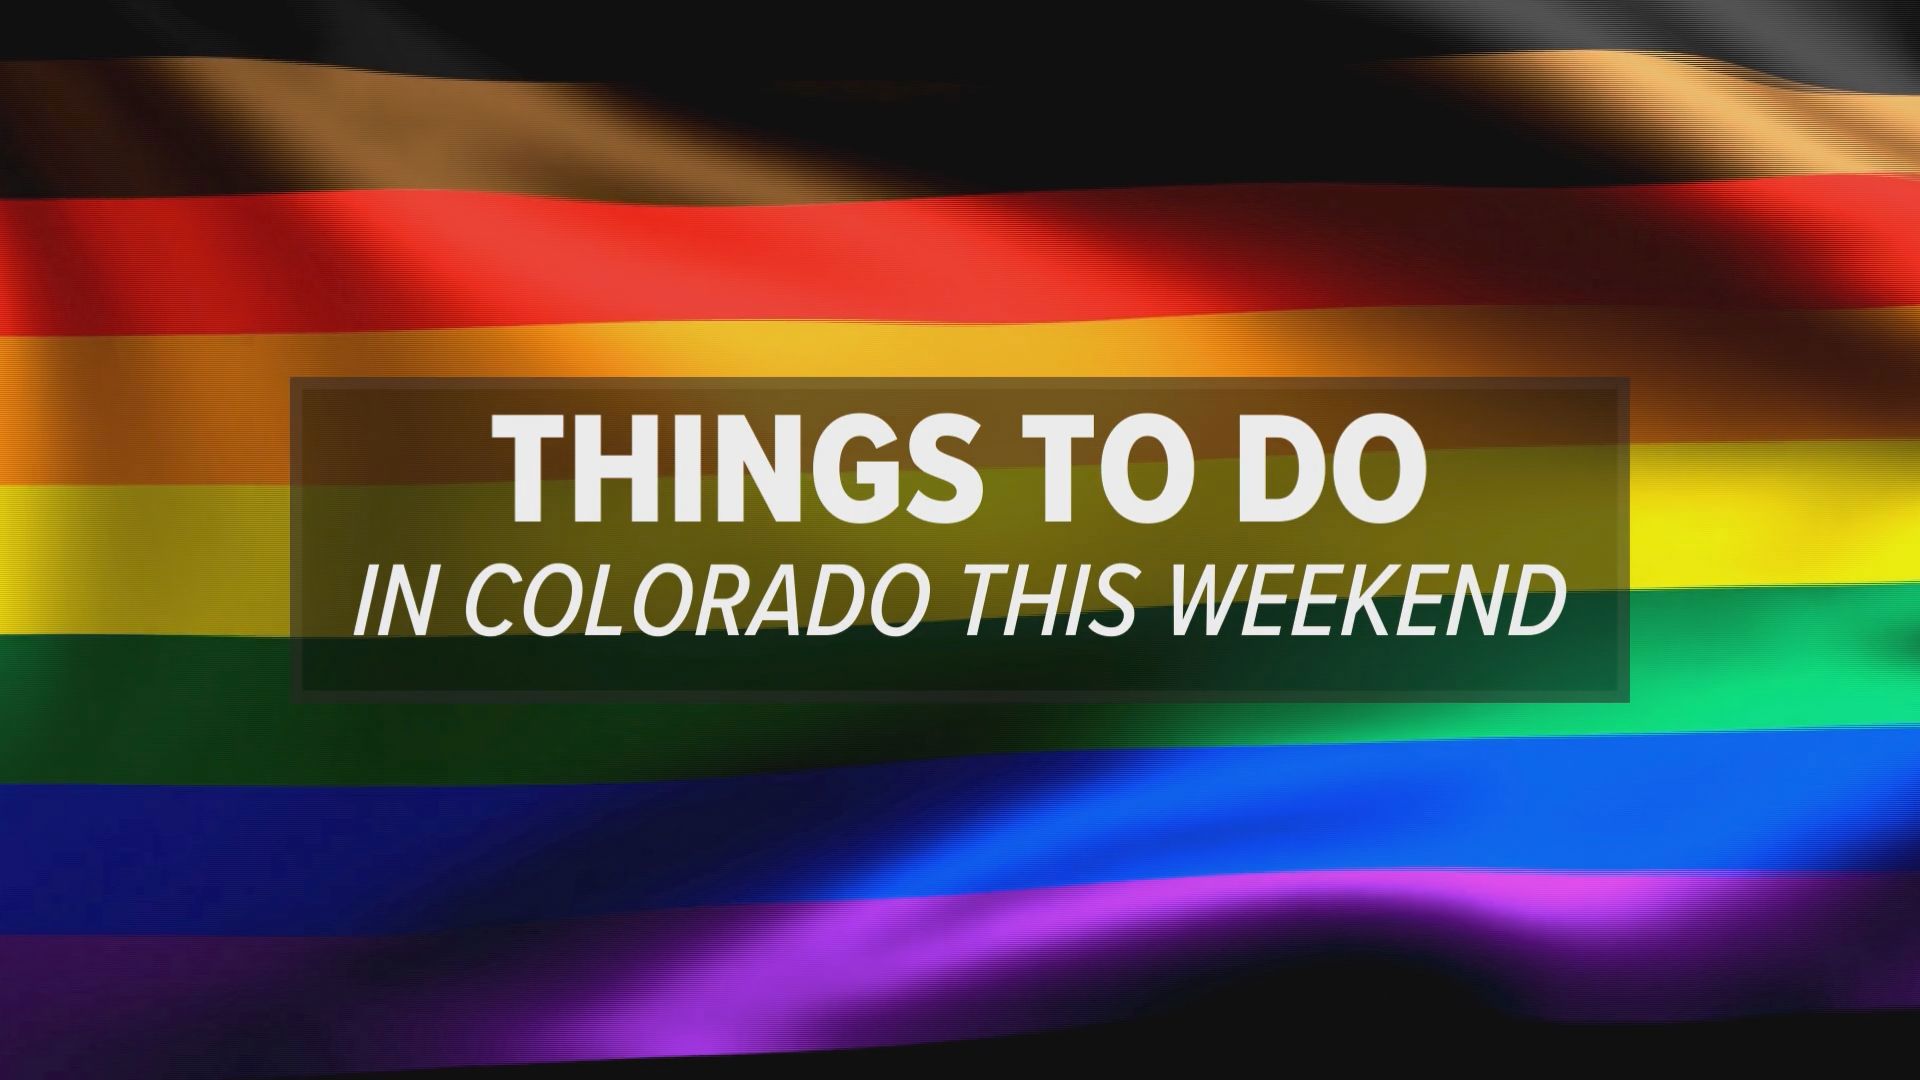 Summer begins with Pride, Cherry Blossom, wood, comedy and strawberry festivals, plus Country Jam Colorado and Frederick in Flight.